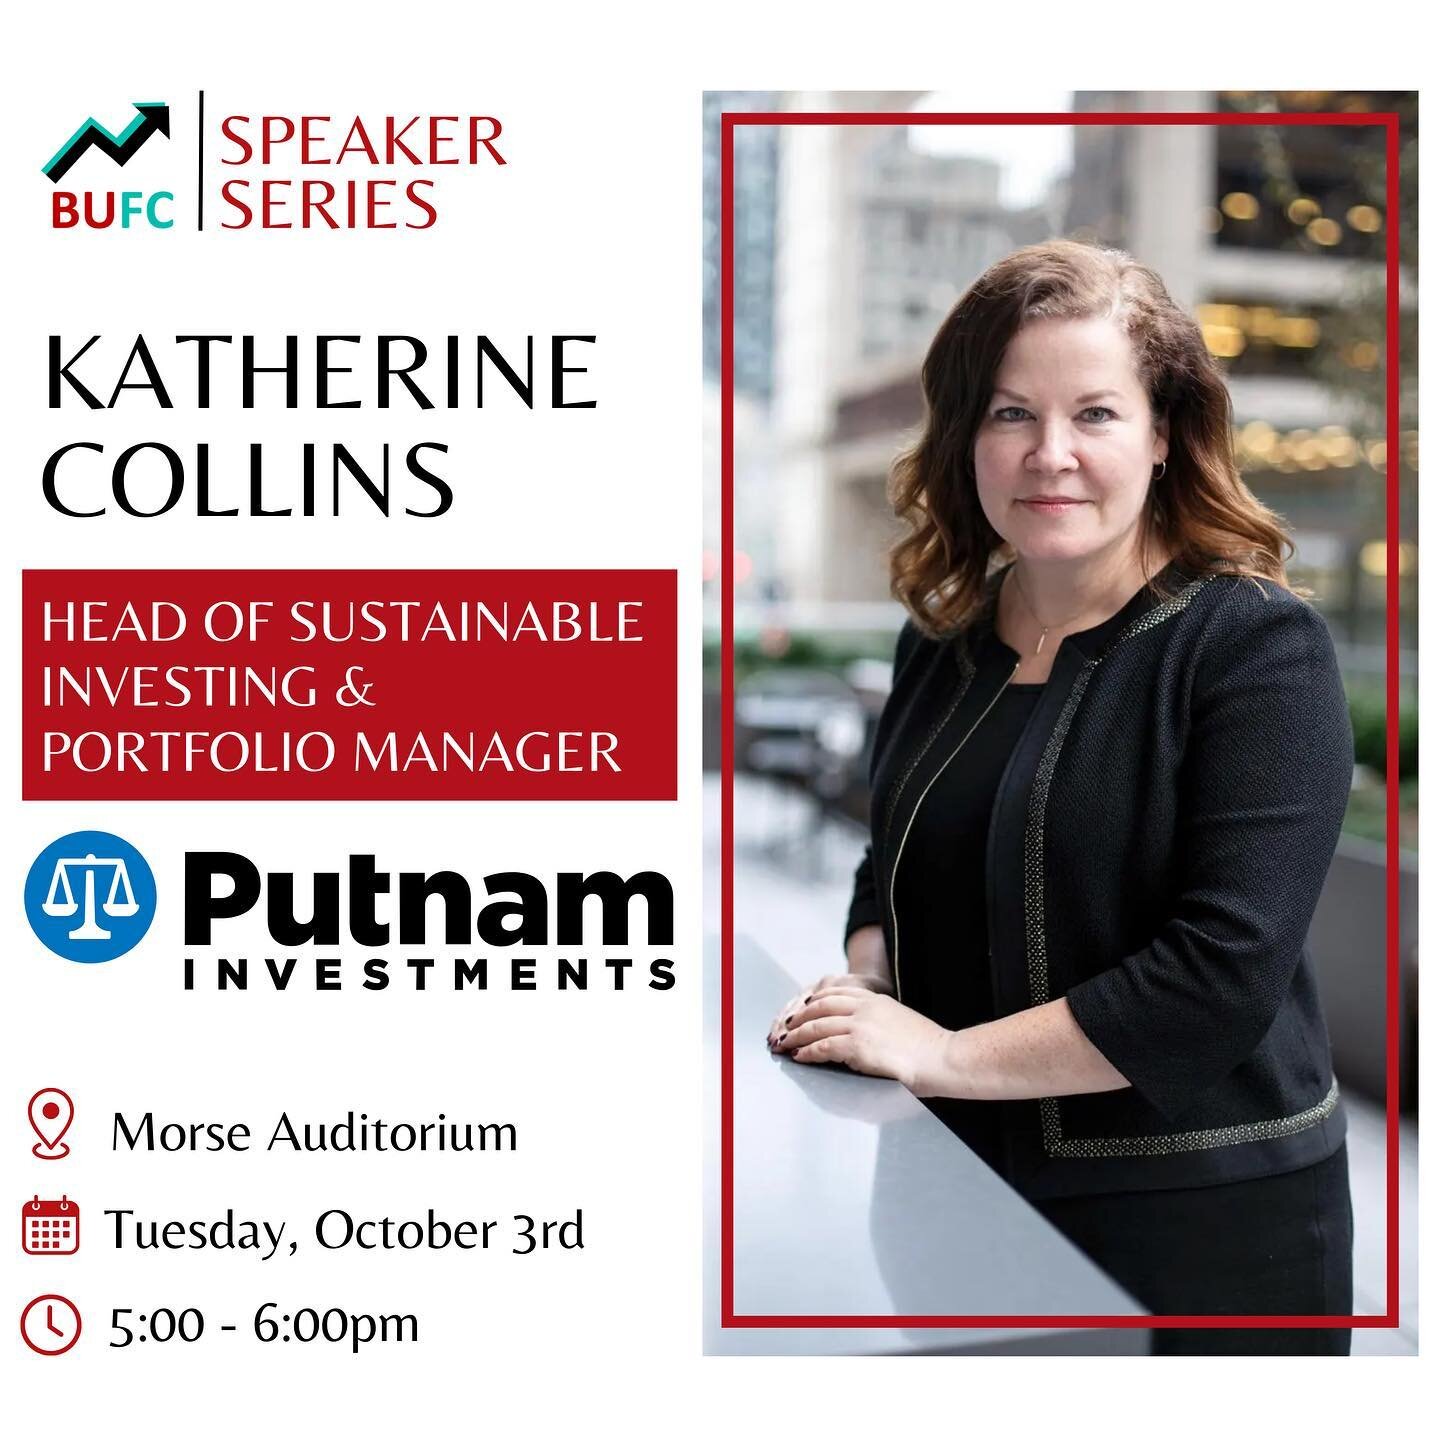 Sign up through the link in our bio to hear Katherine Collins on Tuesday, October 3rd, at 5 pm in the Morse Auditorium!